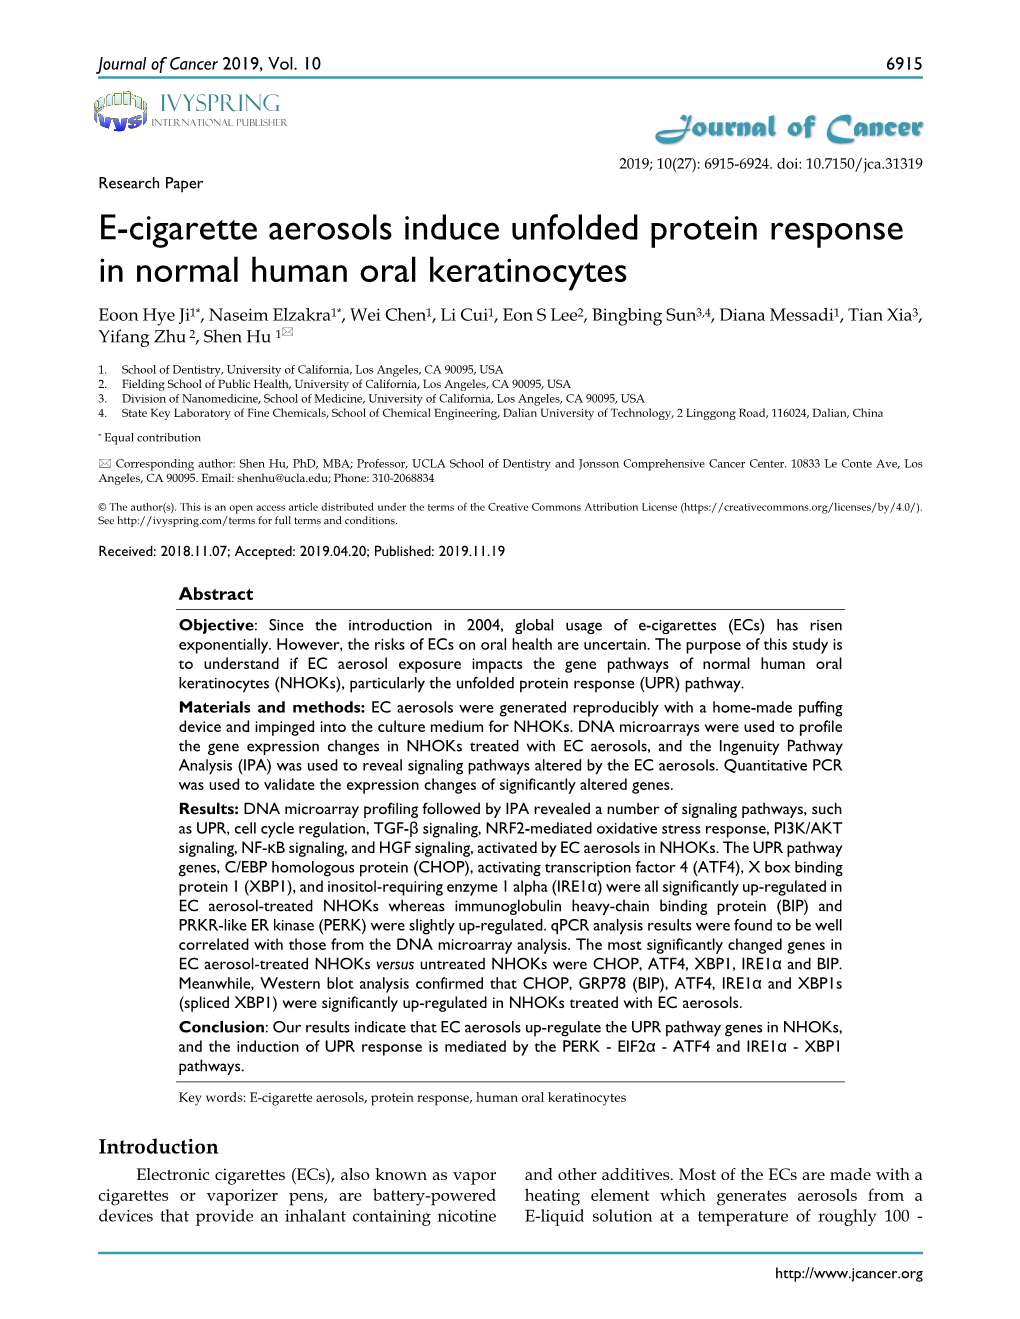 E-Cigarette Aerosols Induce Unfolded Protein Response in Normal Human Oral Keratinocytes